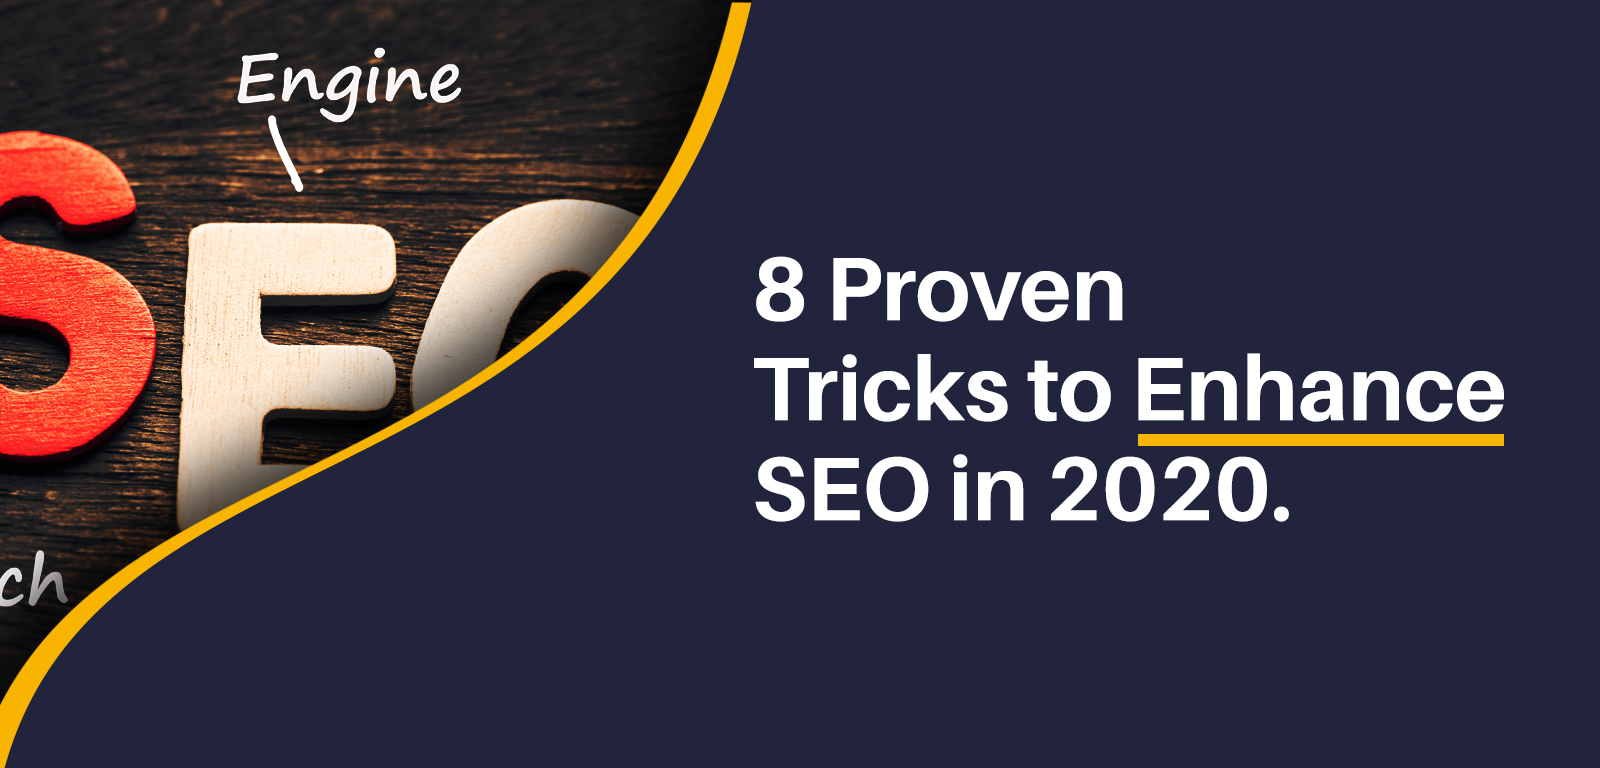 8 Proven tricks to enhance SEO in 2020